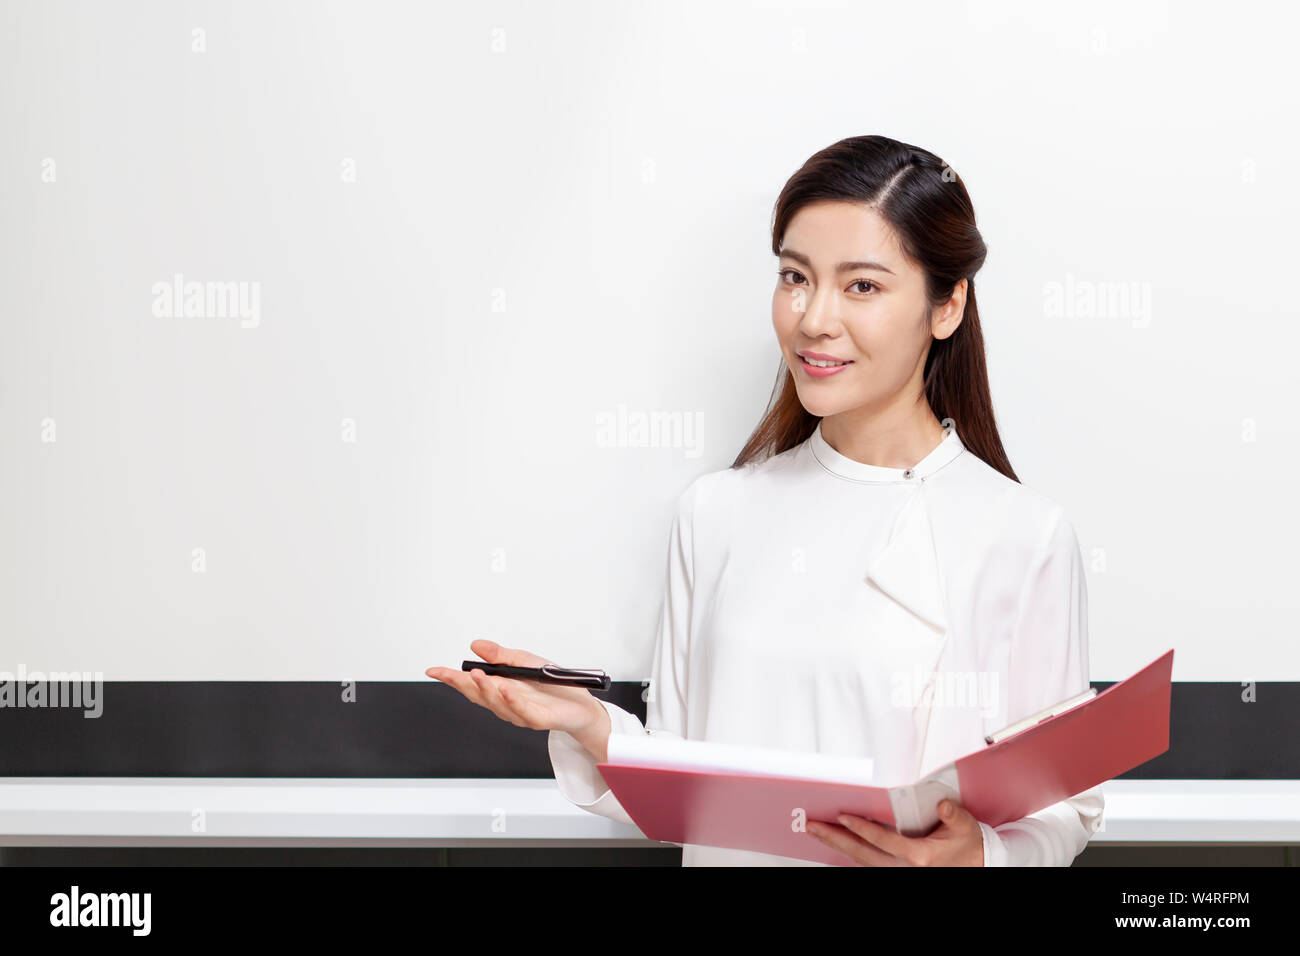 Woman in front of whiteboard, Beijing China Stock Photo